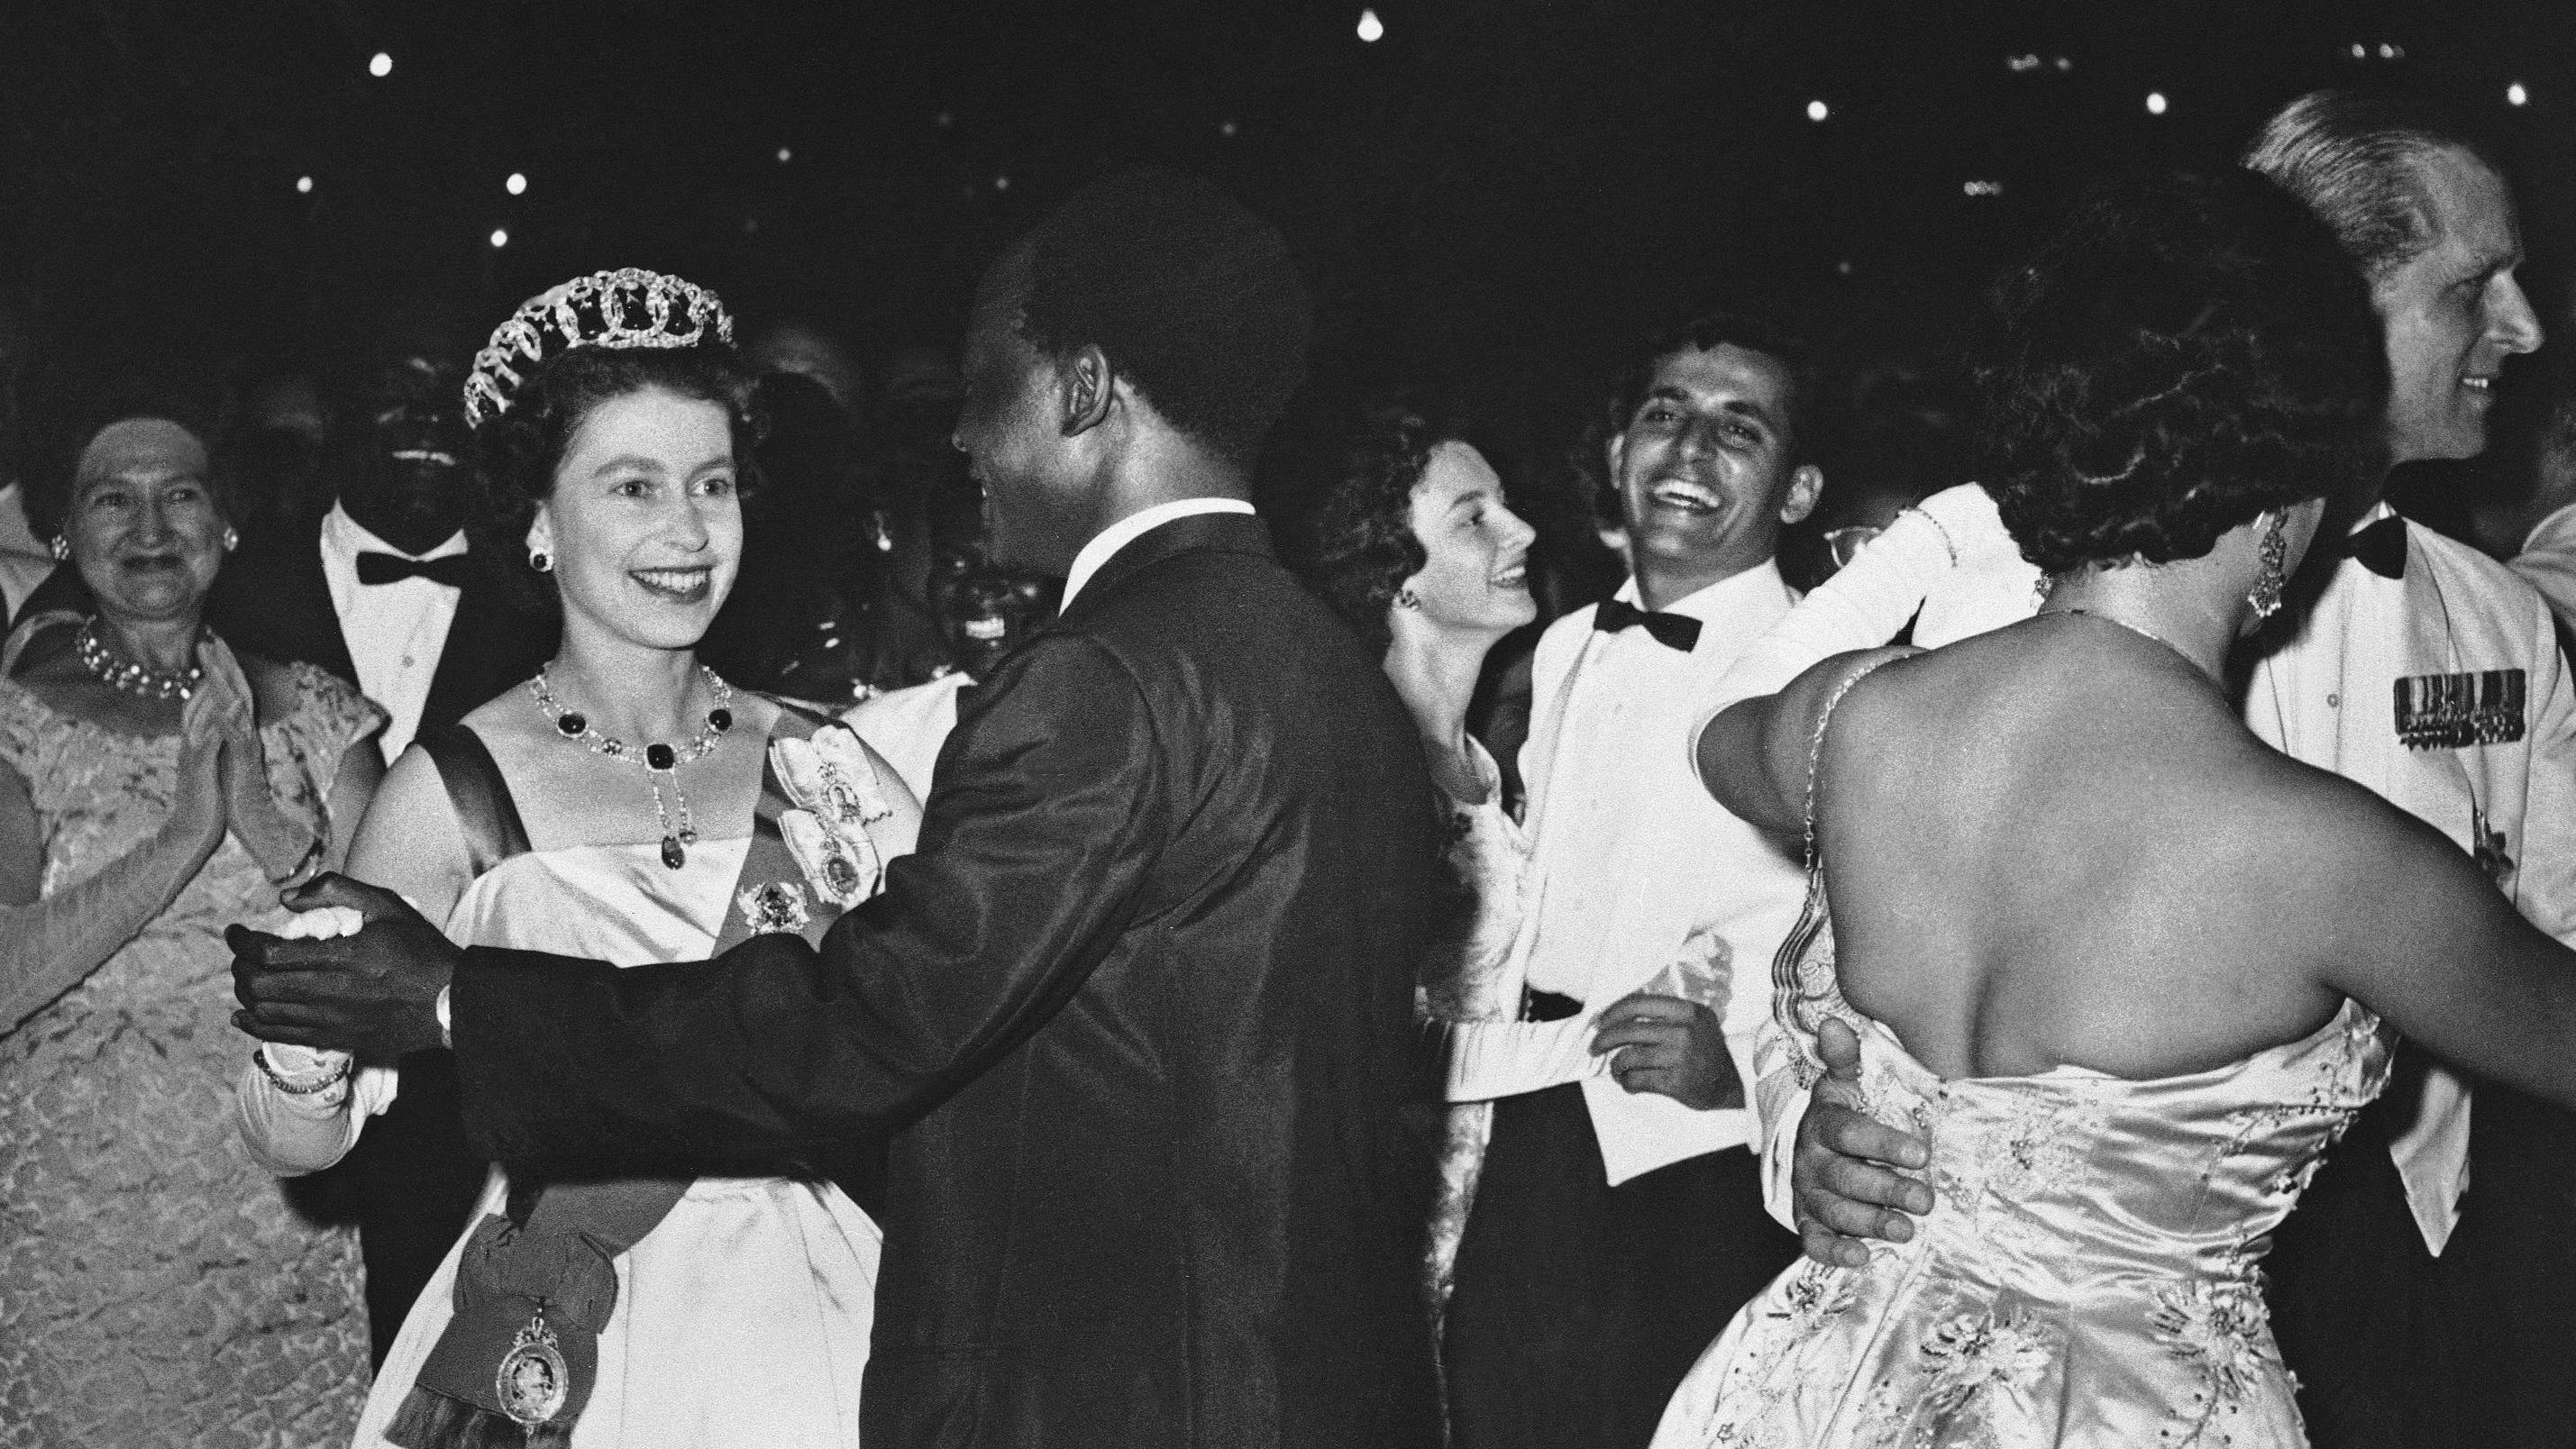 5 intimate moments Queen Elizabeth II shared with Africa